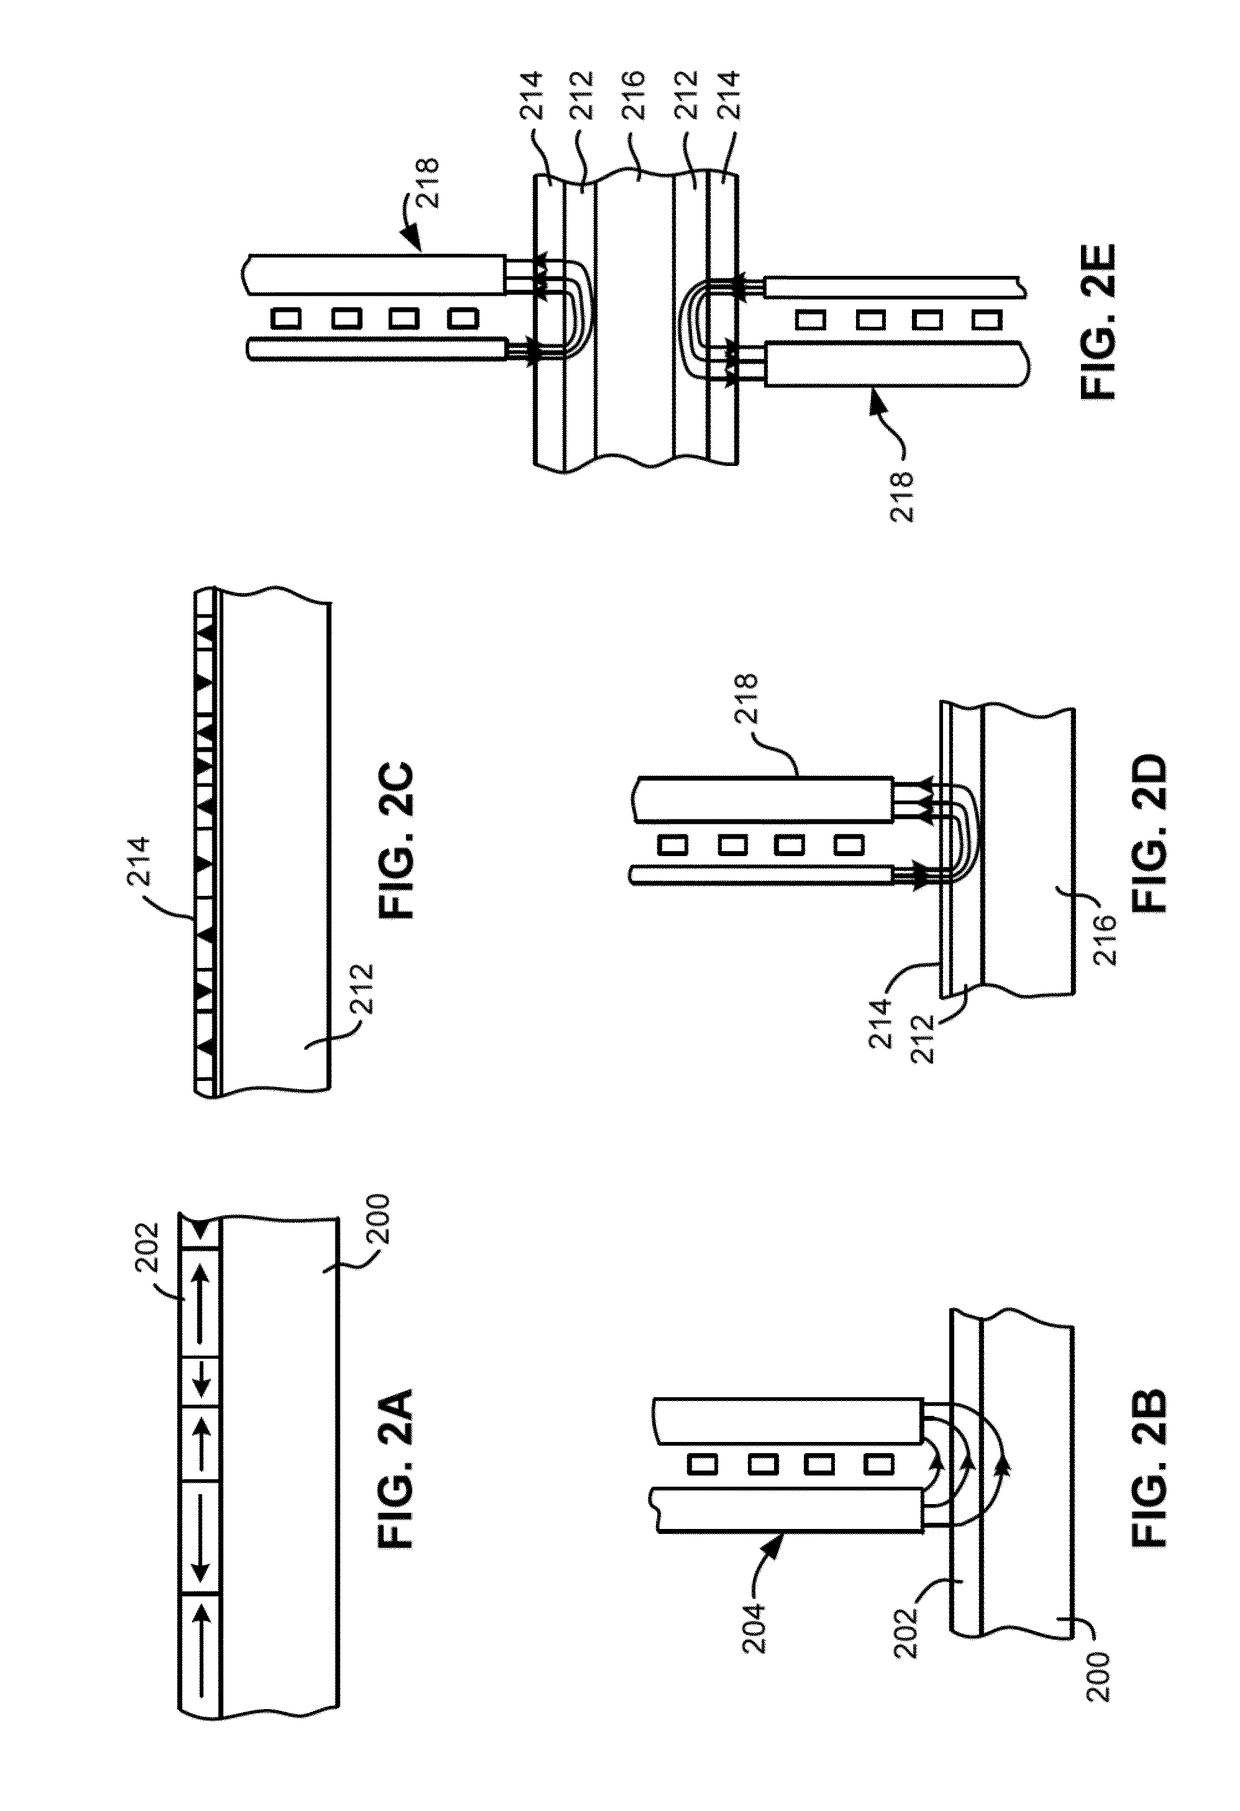 Microwave-assisted magnetic recording head having a current confinement structure